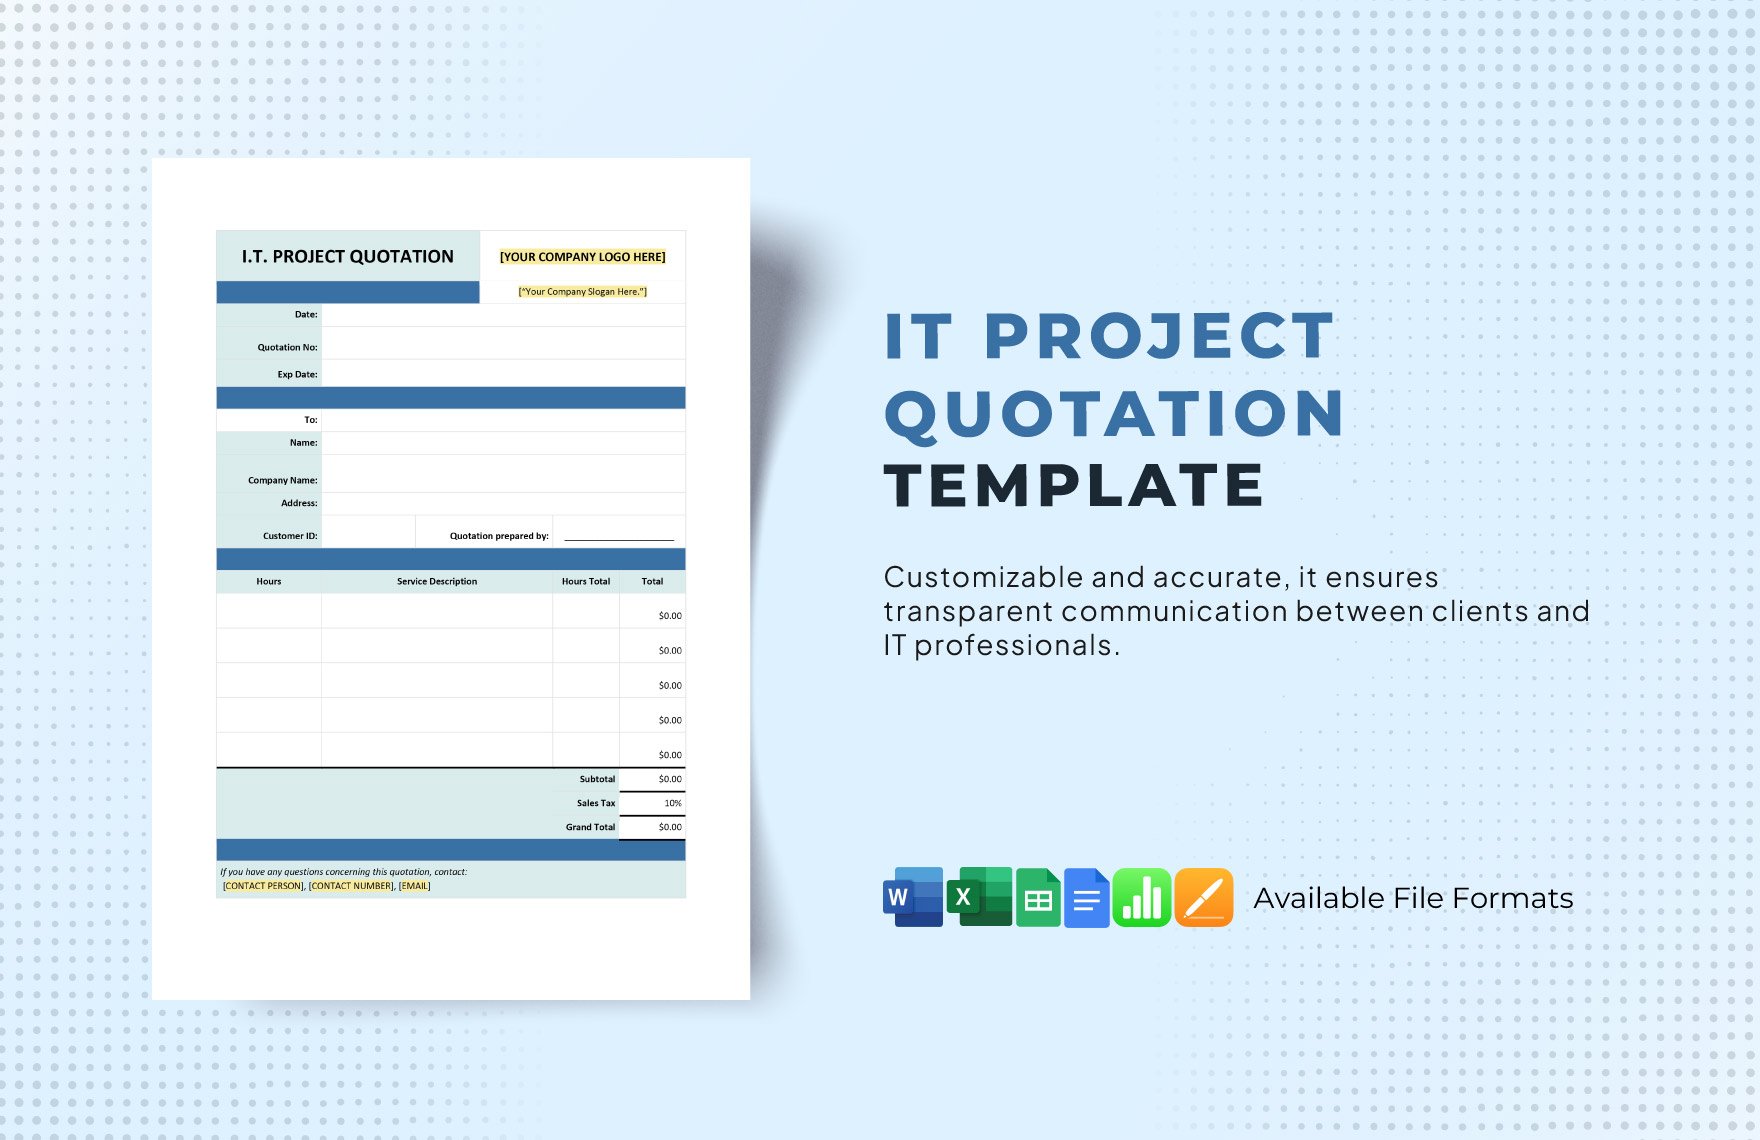 IT Project Quotation Template